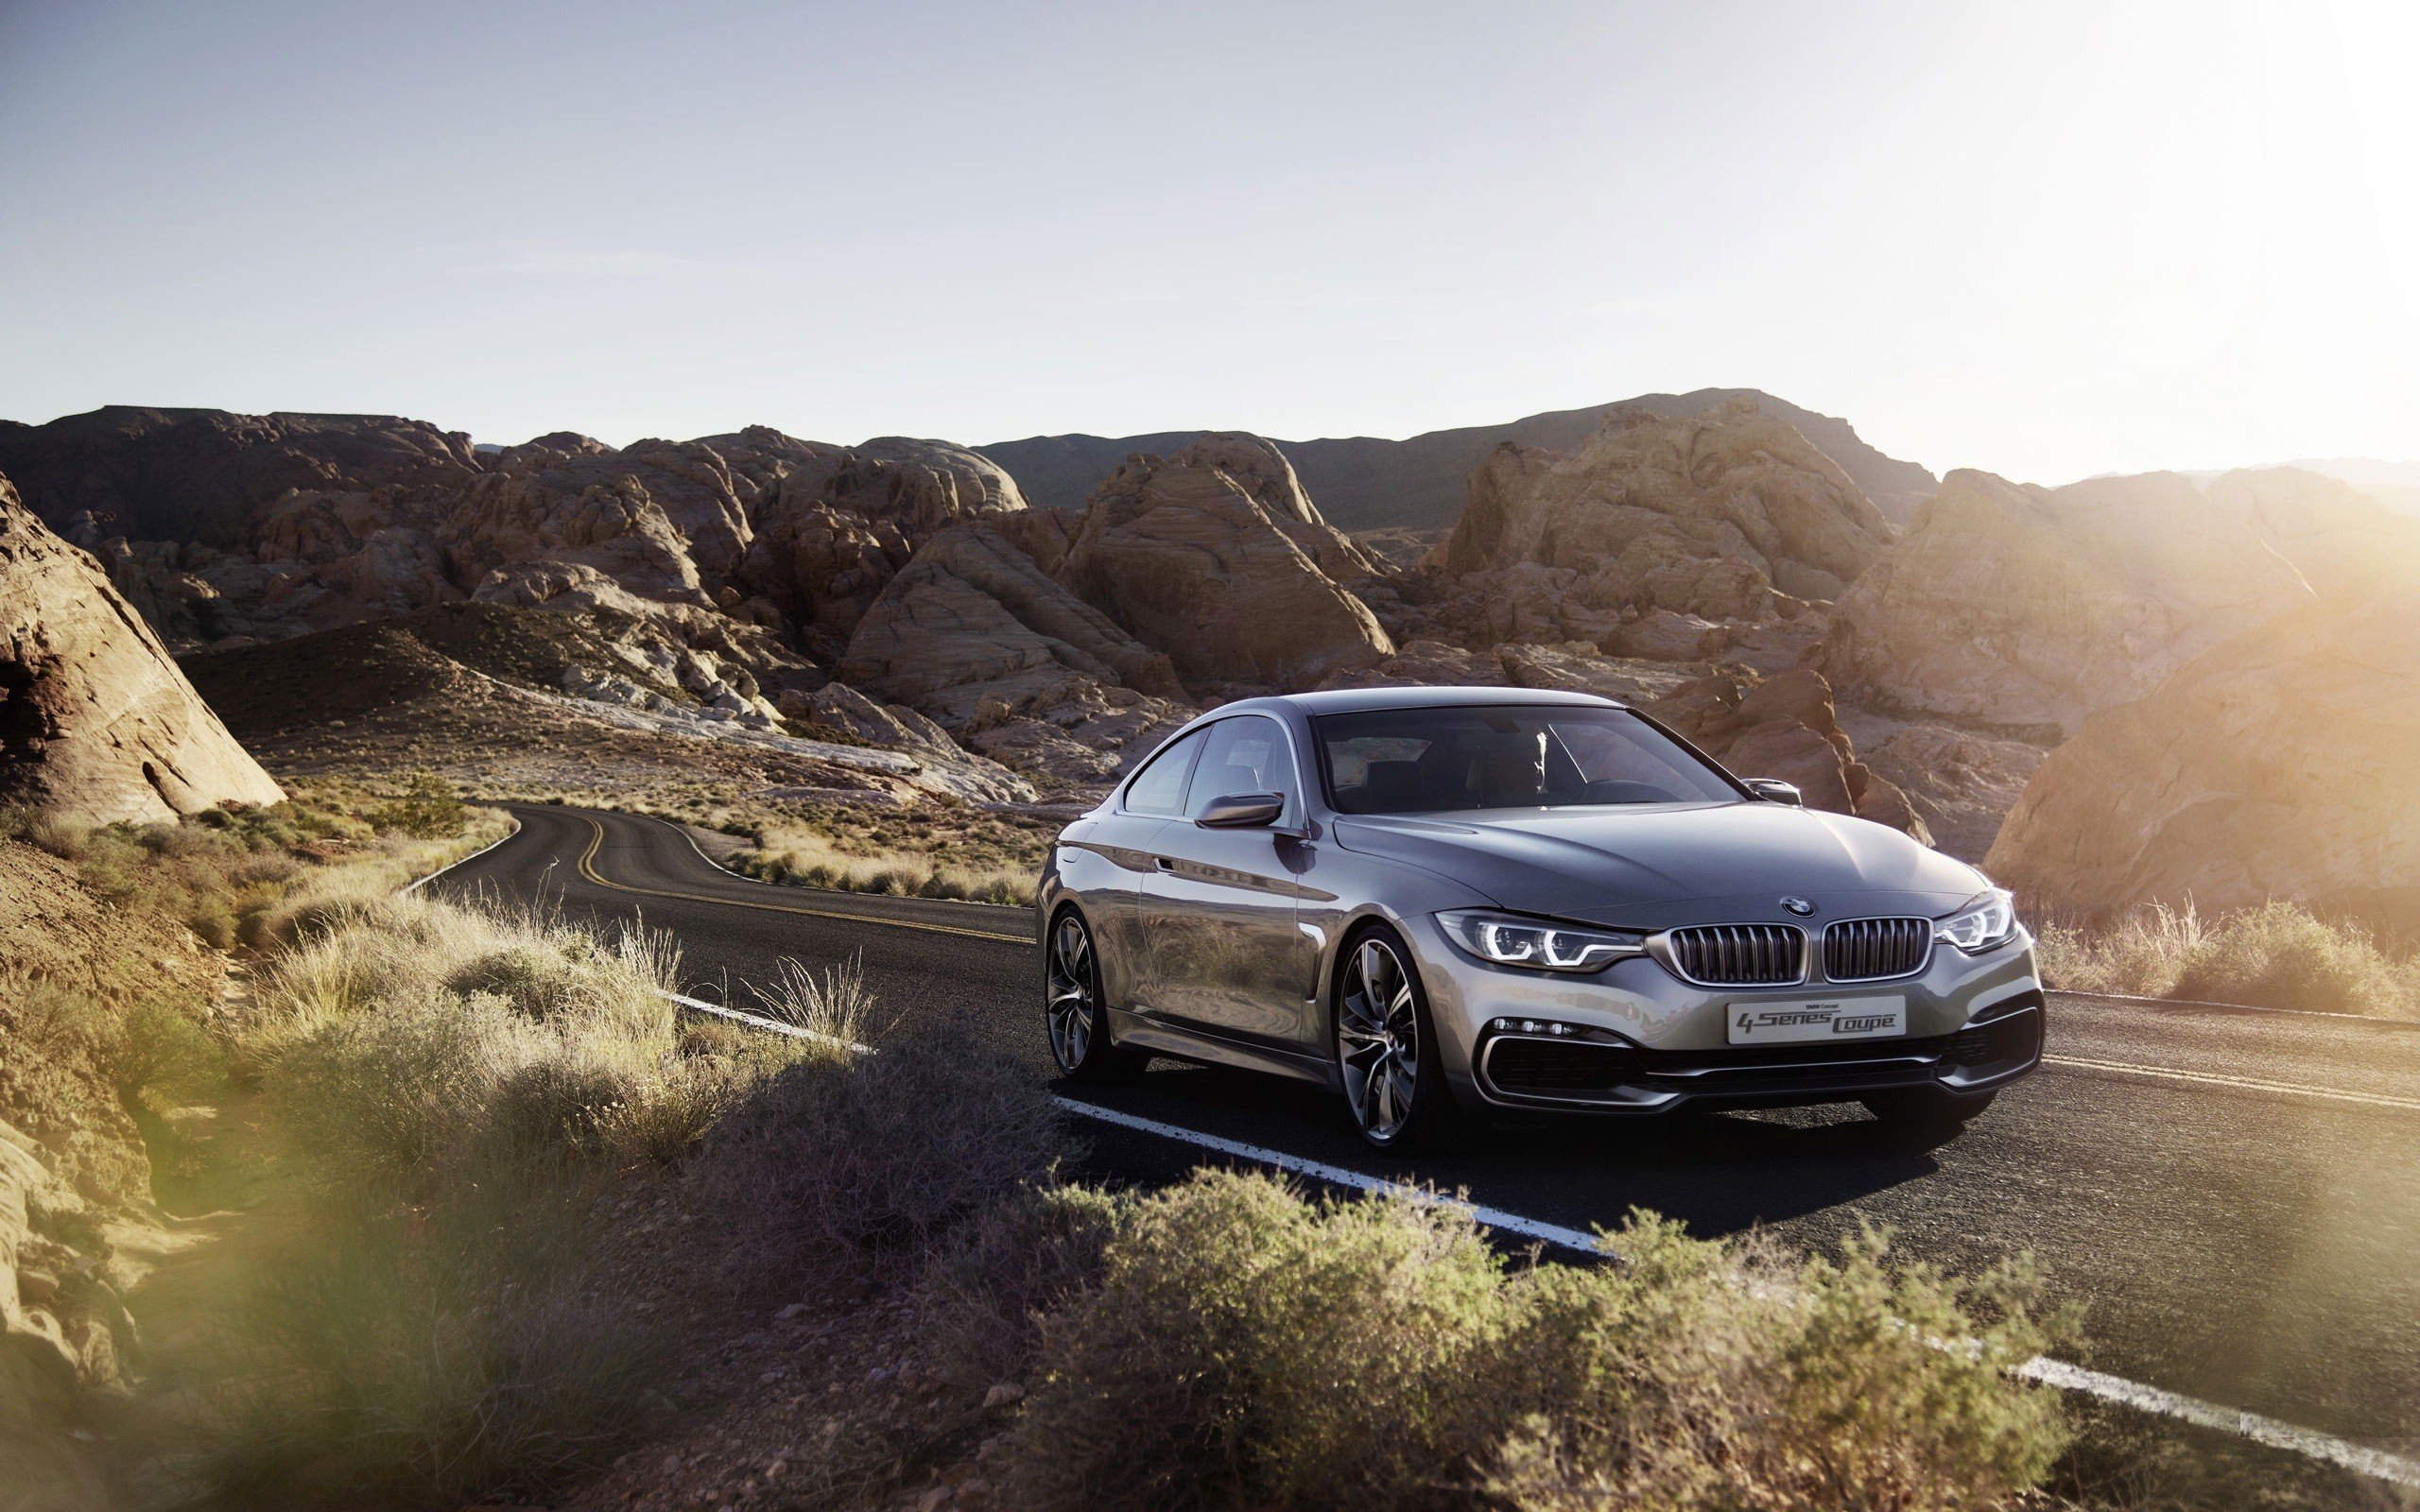 bmw, 4, Series, Coupe, Bmw, 4, Series, Coupe, Concept Wallpaper